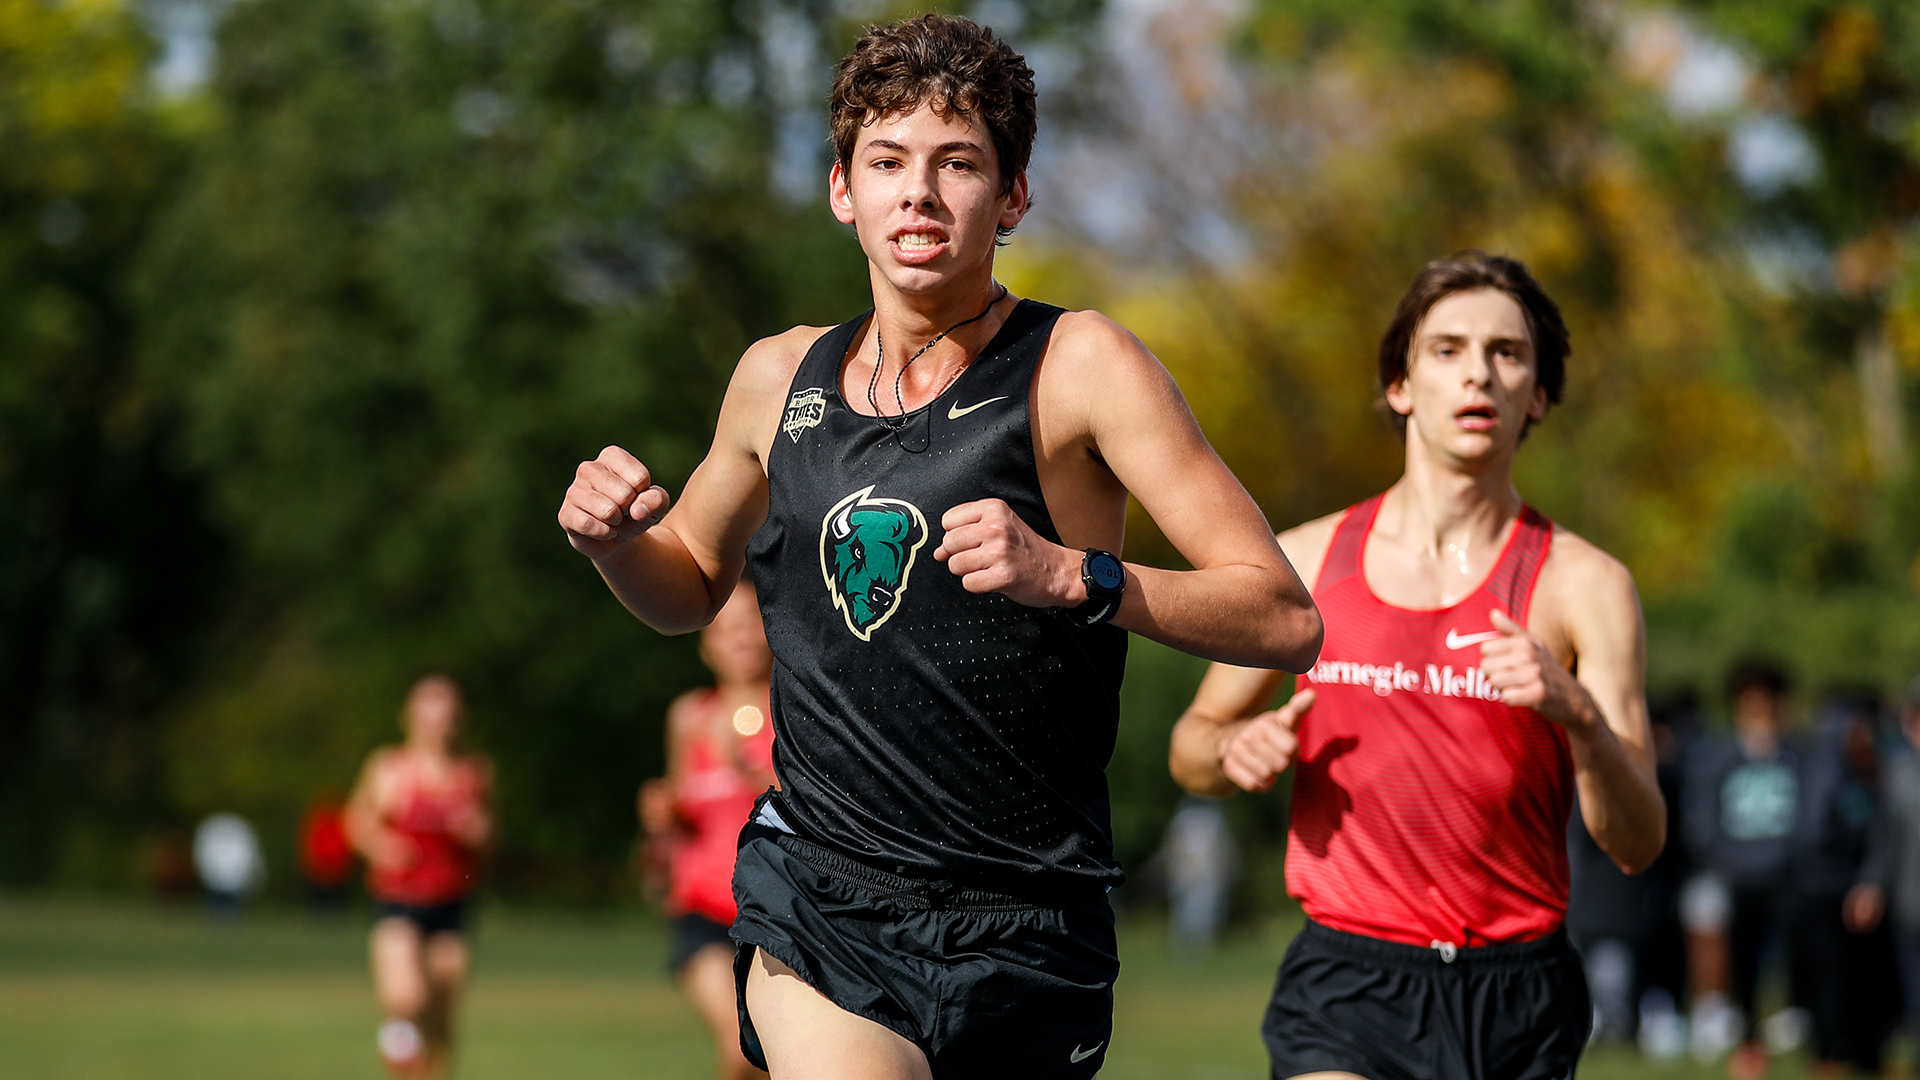 McKenna selected RSC Men's Cross Country Runner of the Week